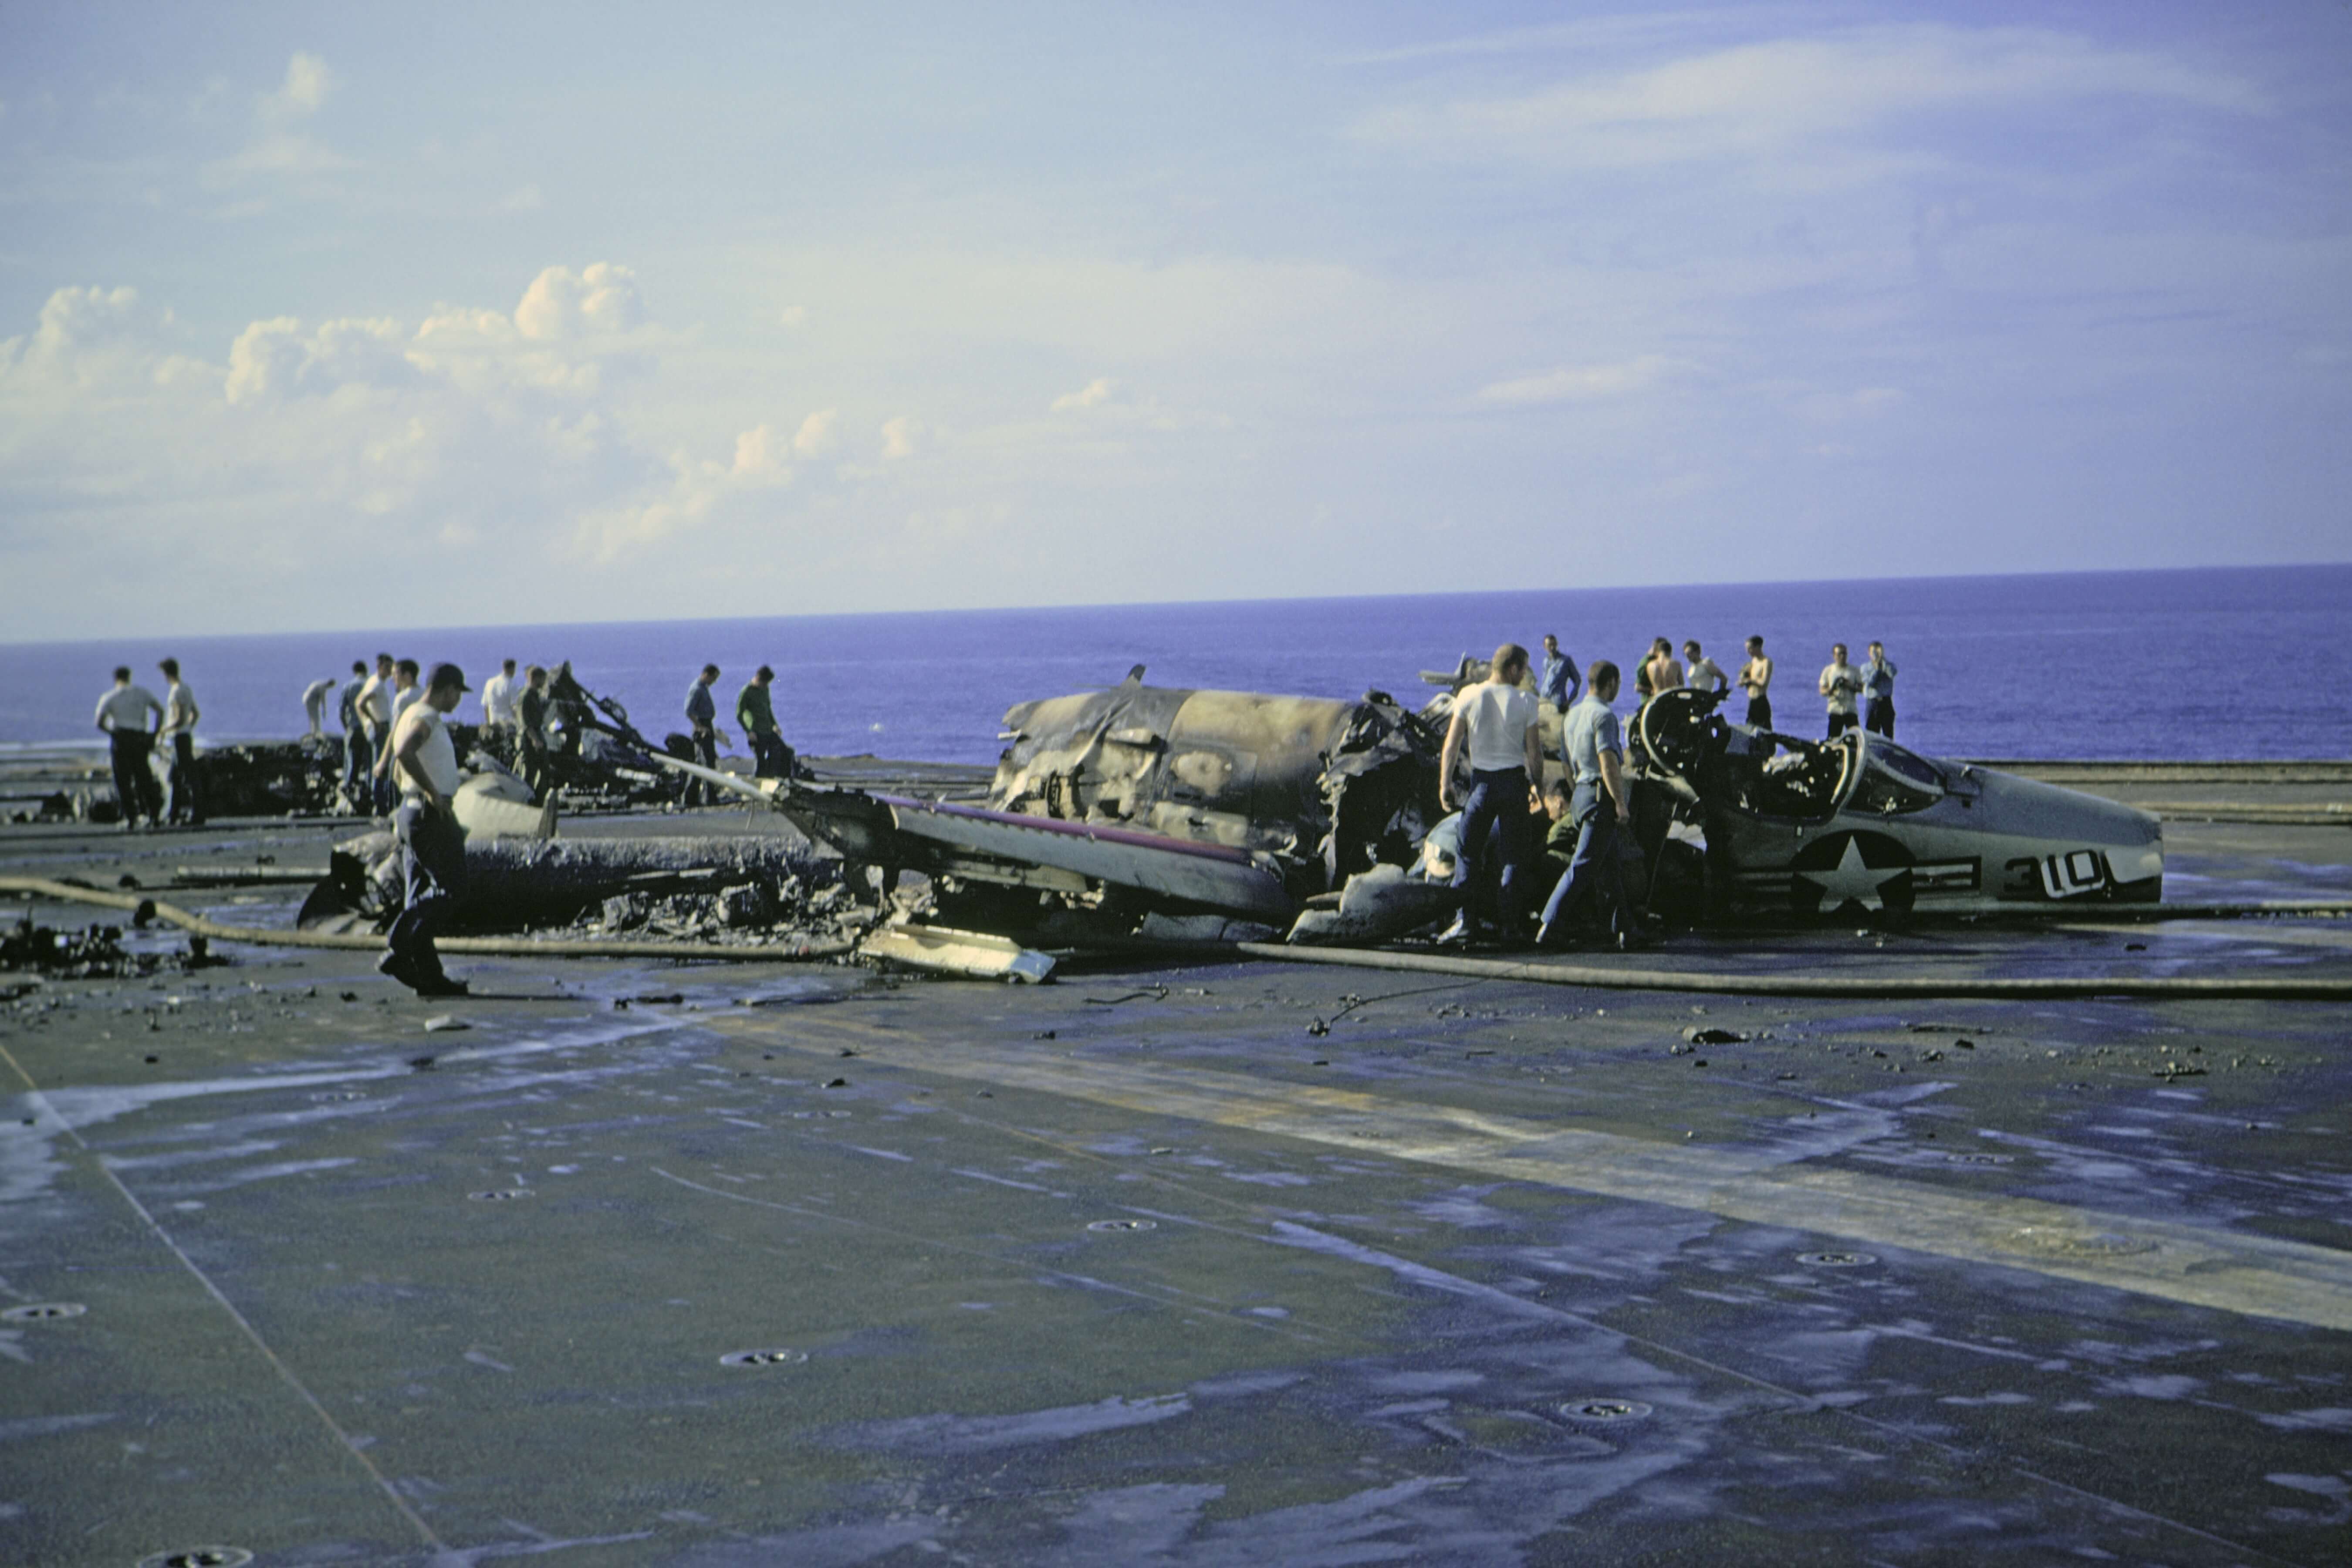 Plane wreckage on top of the deck of a large Navy boat.